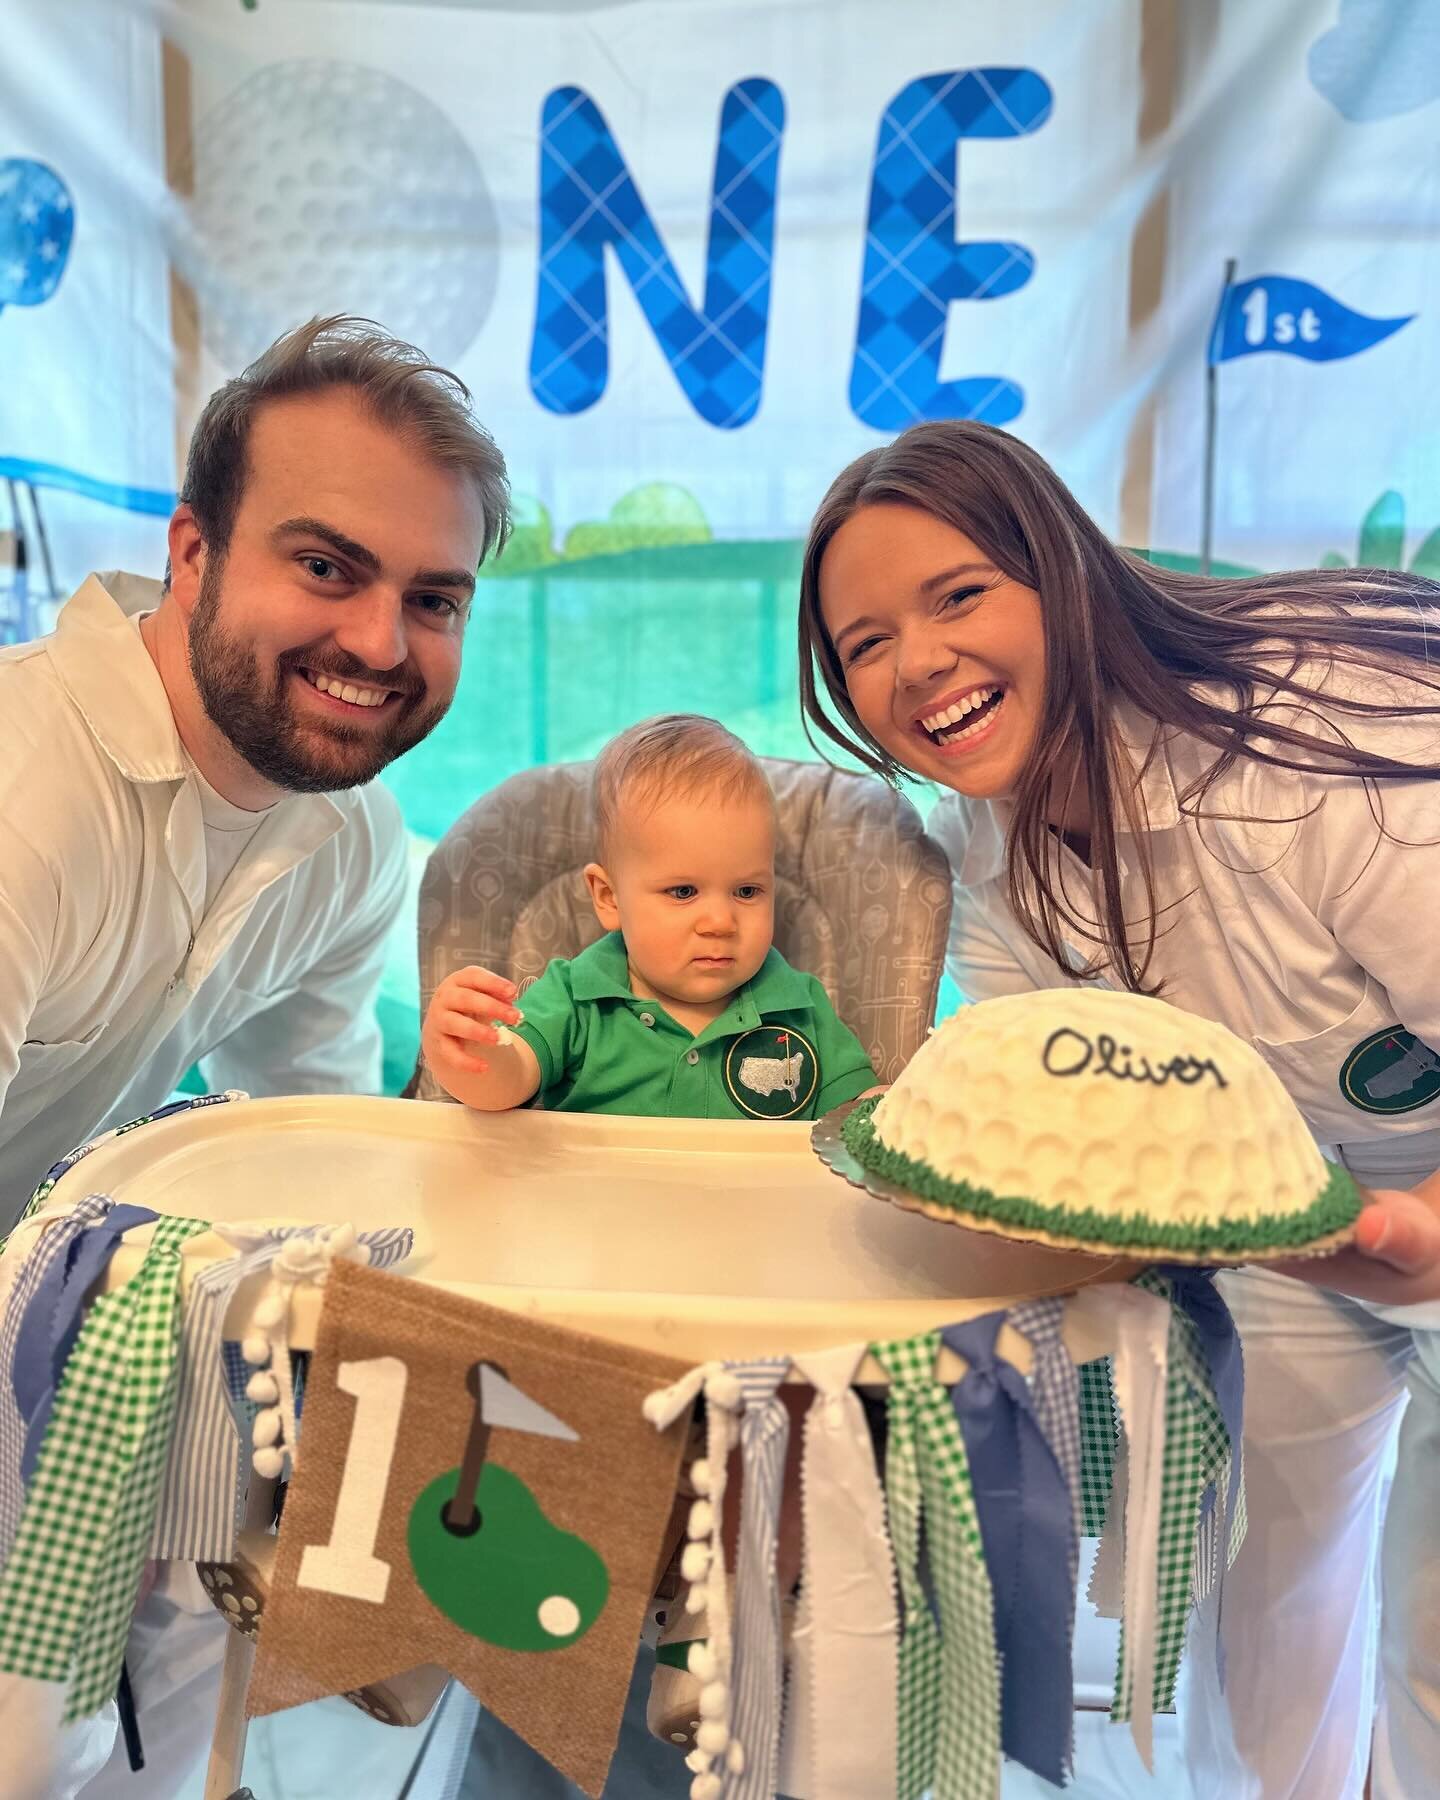 Baby Kailey Cakes turned one this week!🏌🏼💚
&bull;
We were so honored to celebrate our sweet son&rsquo;s birthday this past week! We loved baking for such a special day!🤍💚
&bull;
&bull;
&bull;
&bull;
&bull;
&bull;
#cake #cakedecorating #birthdayc